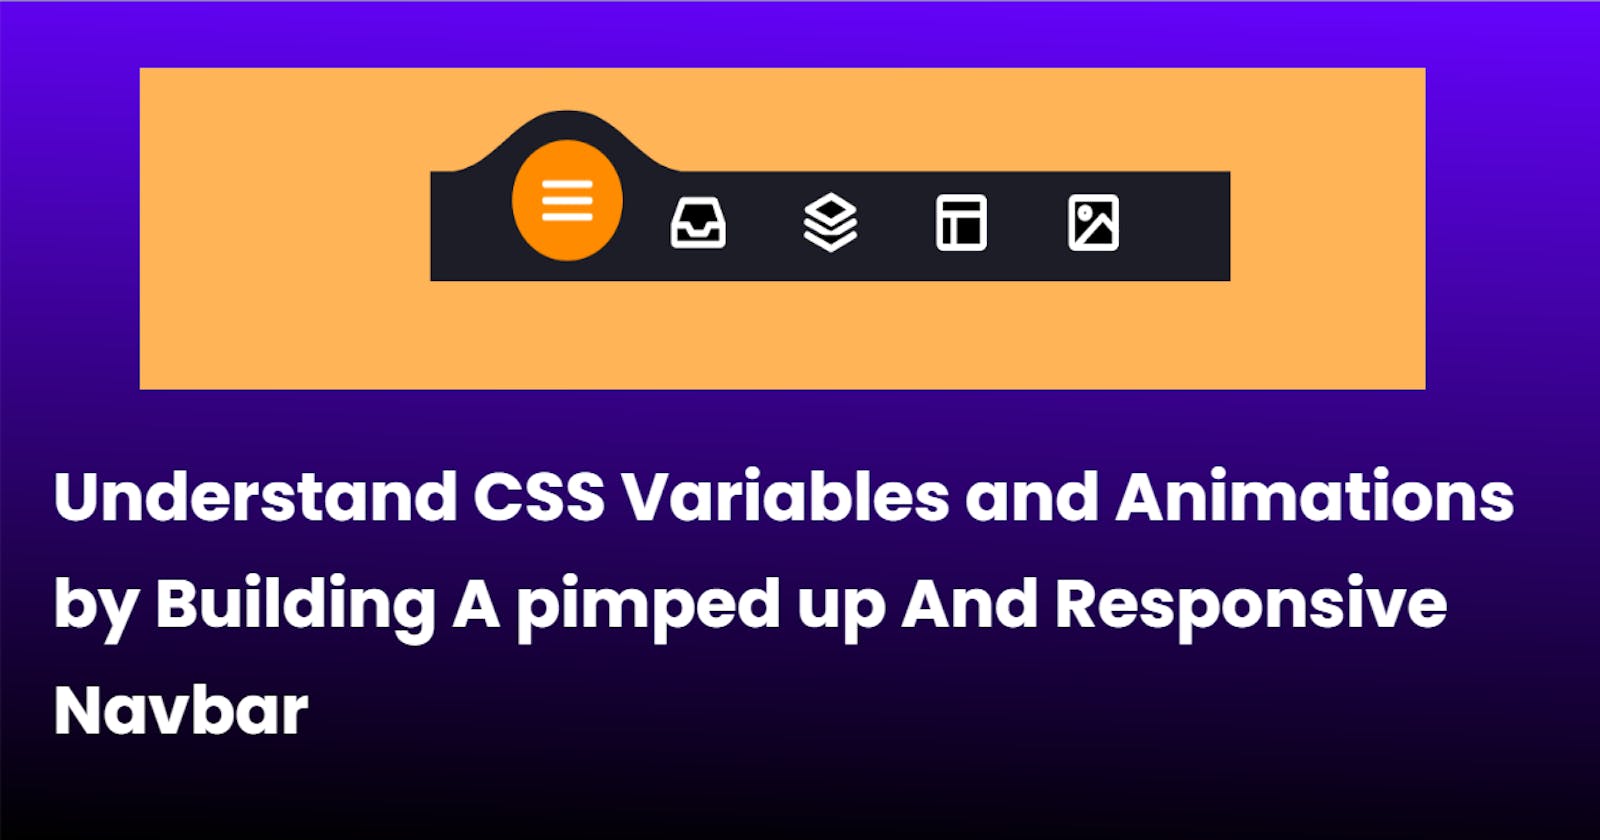 Understand CSS Variables and Animations by Building A pimped up And Responsive Navbar